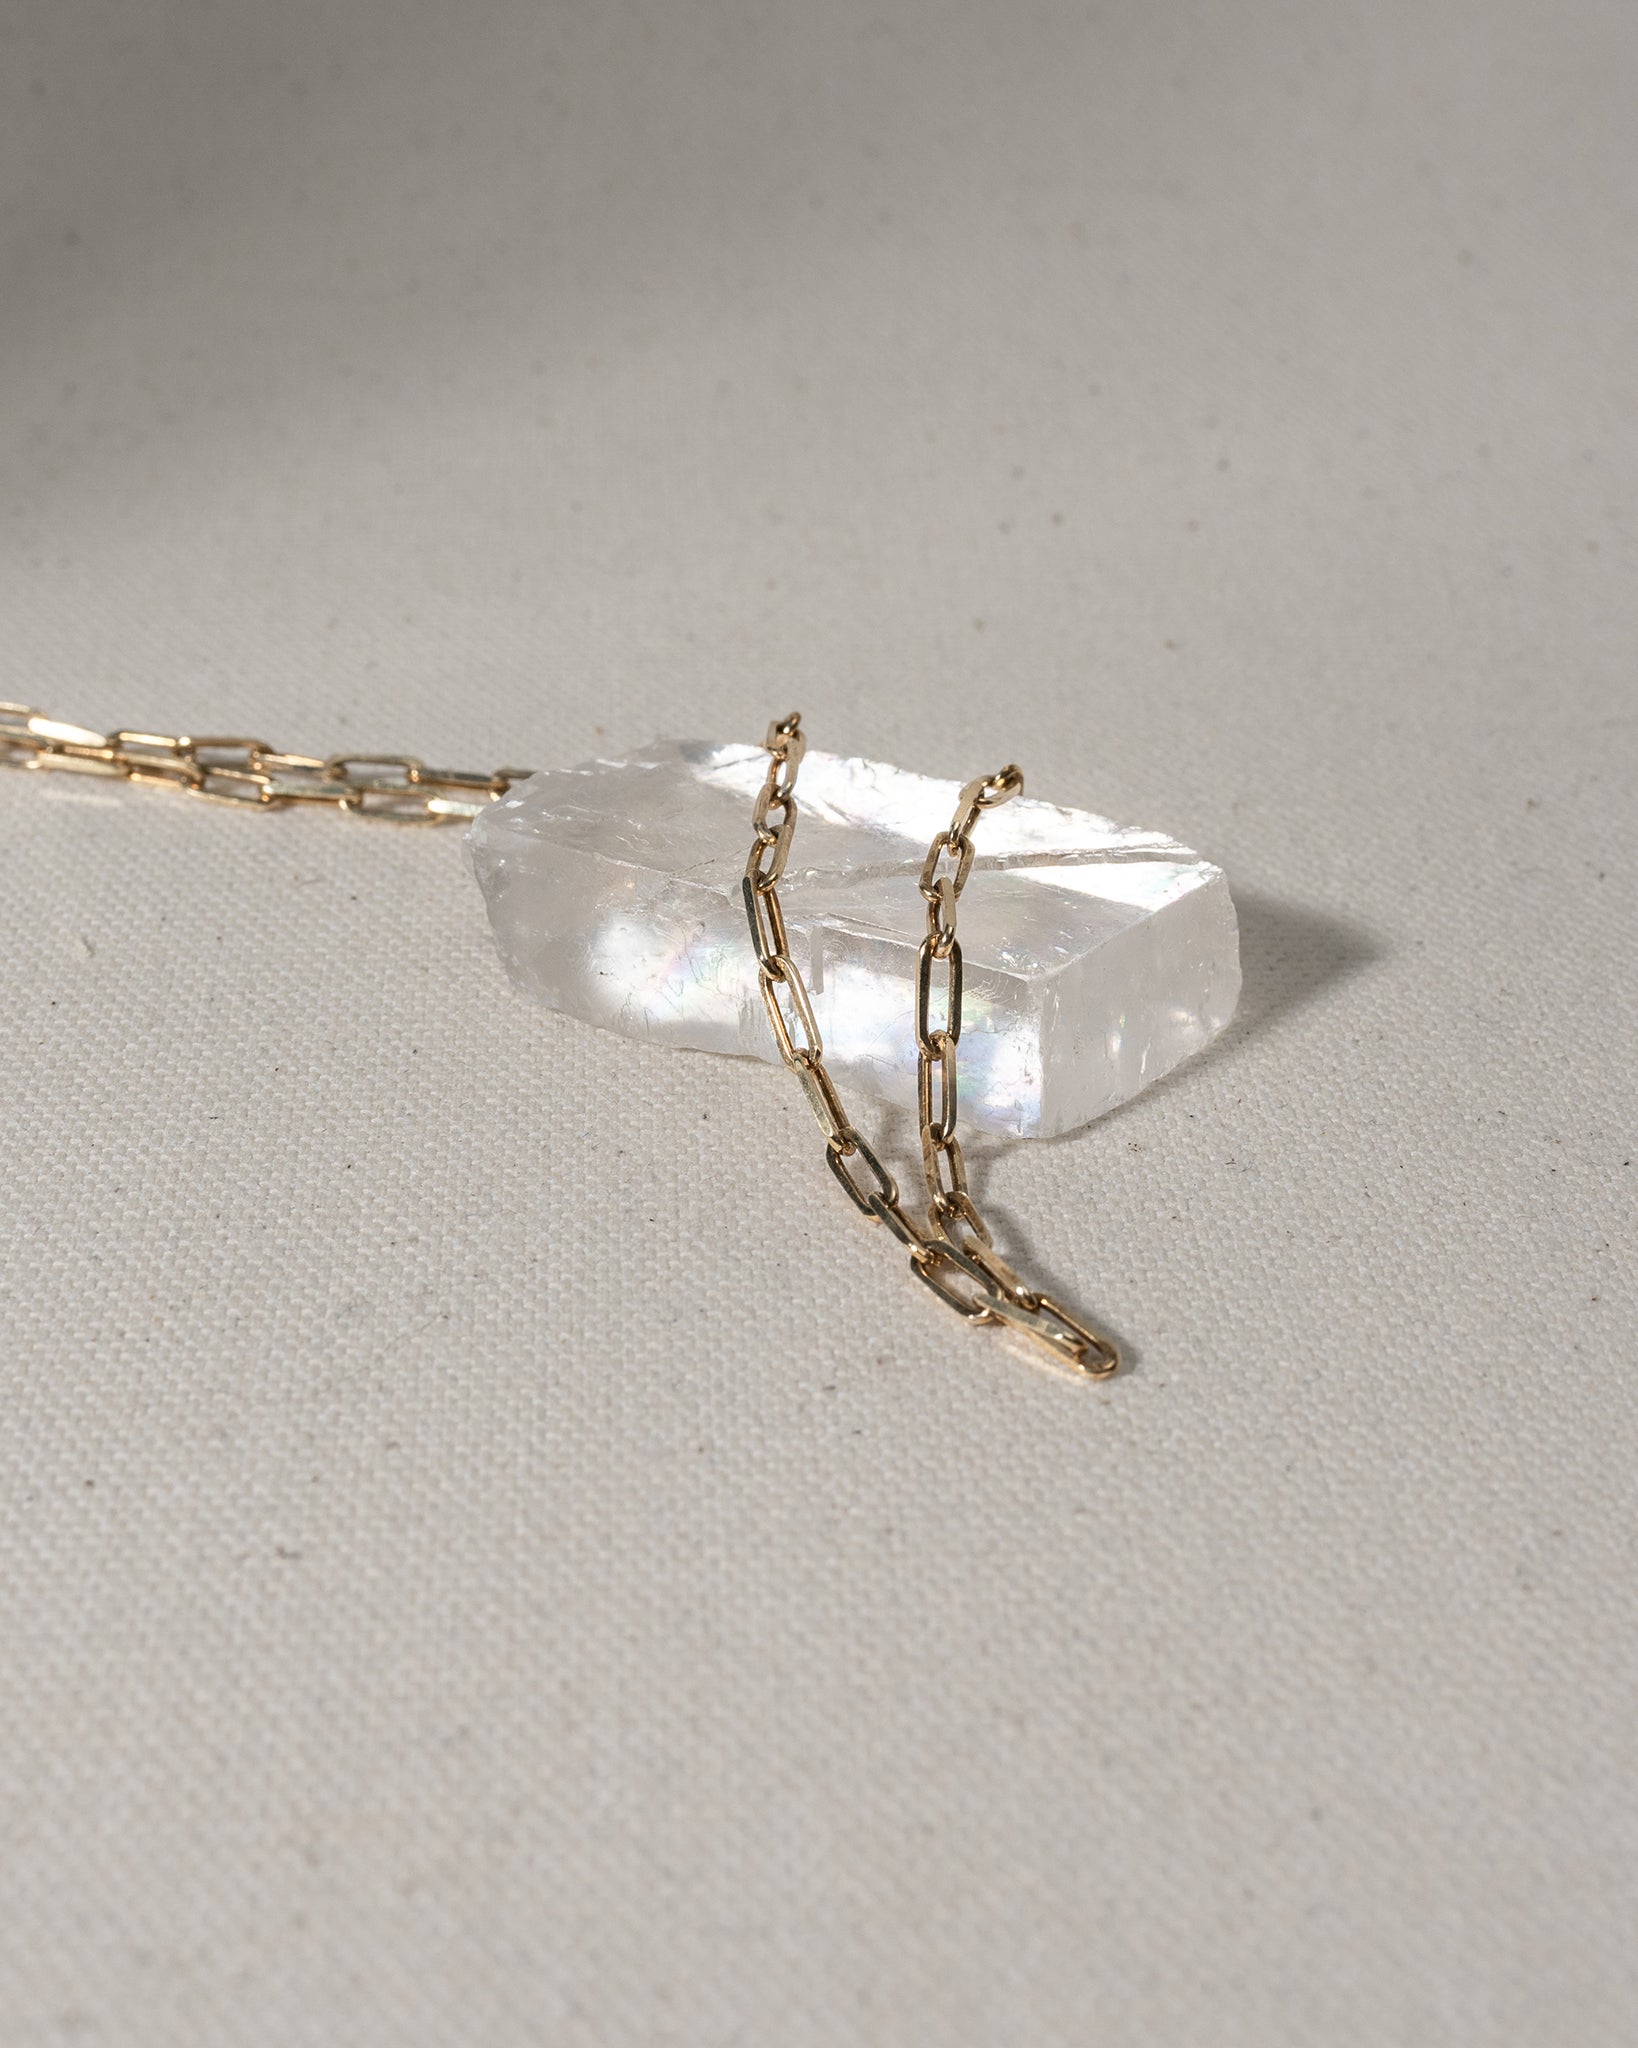 Gold chain with large oval links laying on glass piece